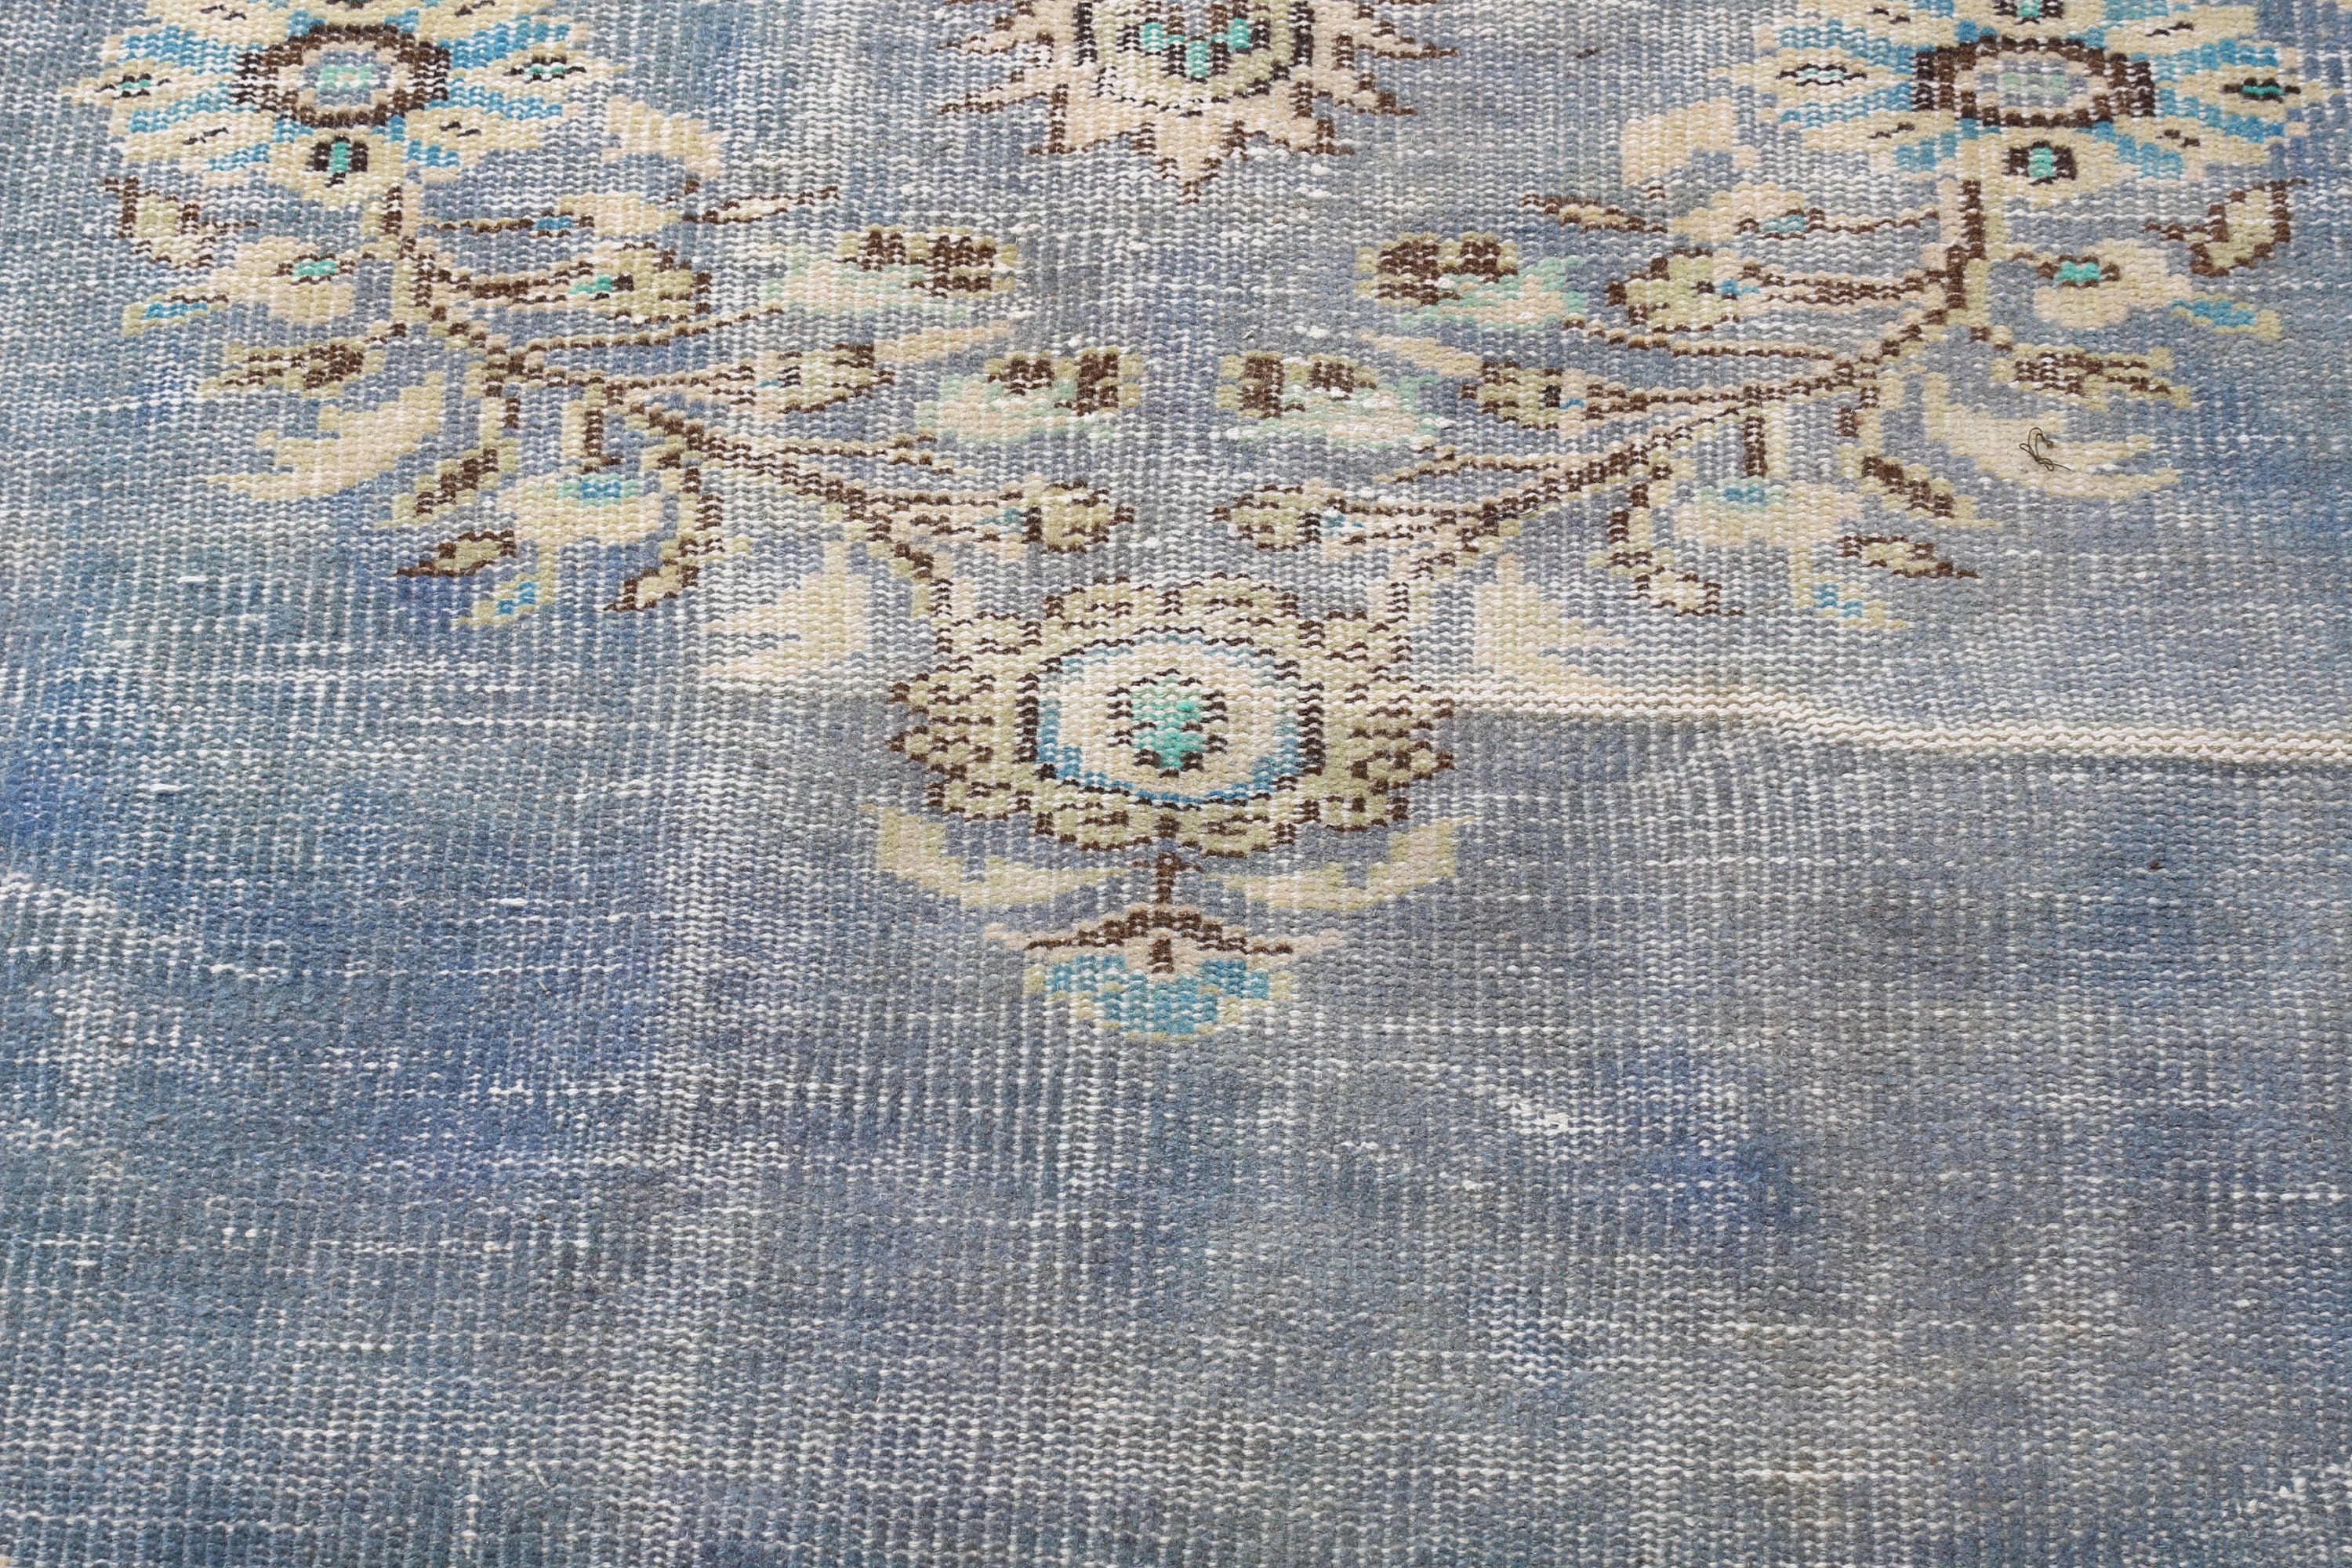 Blue Anatolian Rug, 4.4x4.4 ft Accent Rug, Vintage Rug, Turkish Rugs, Home Decor Rugs, Bedroom Rugs, Kitchen Rug, Old Rug